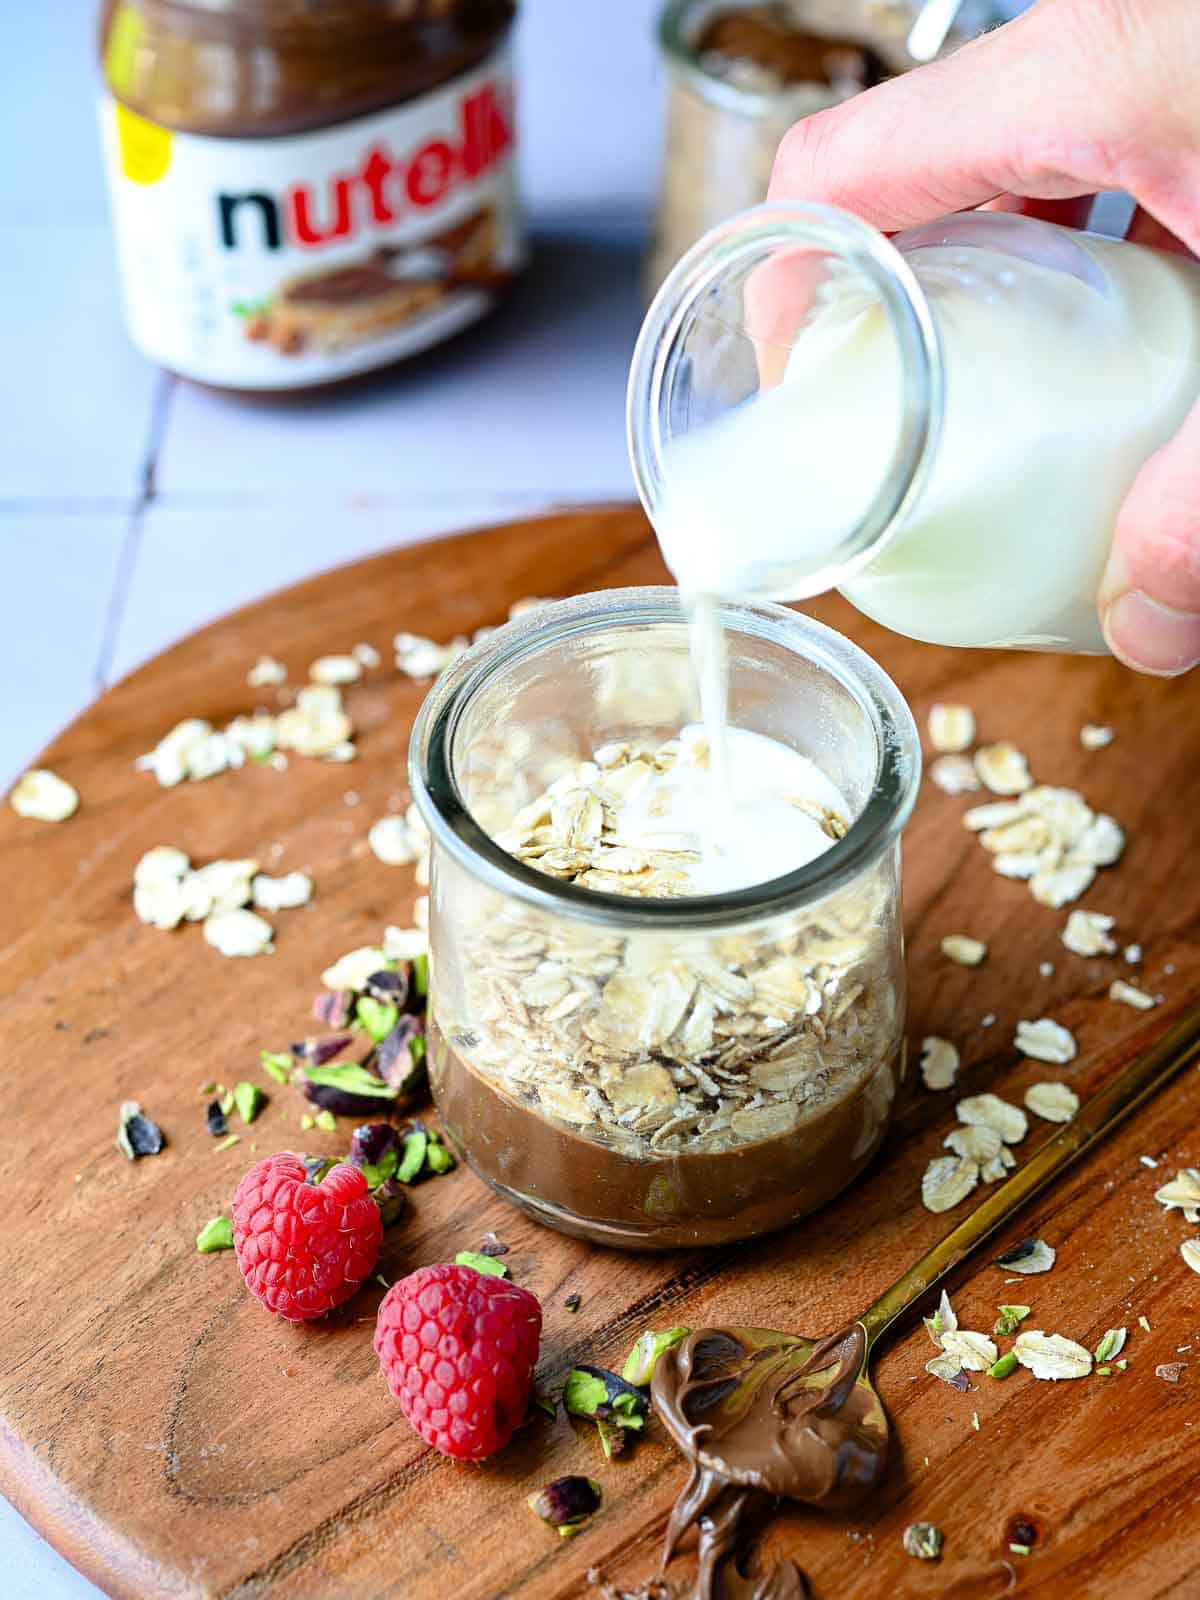 Milk is poured into a jar of oats and Nutella on wood.